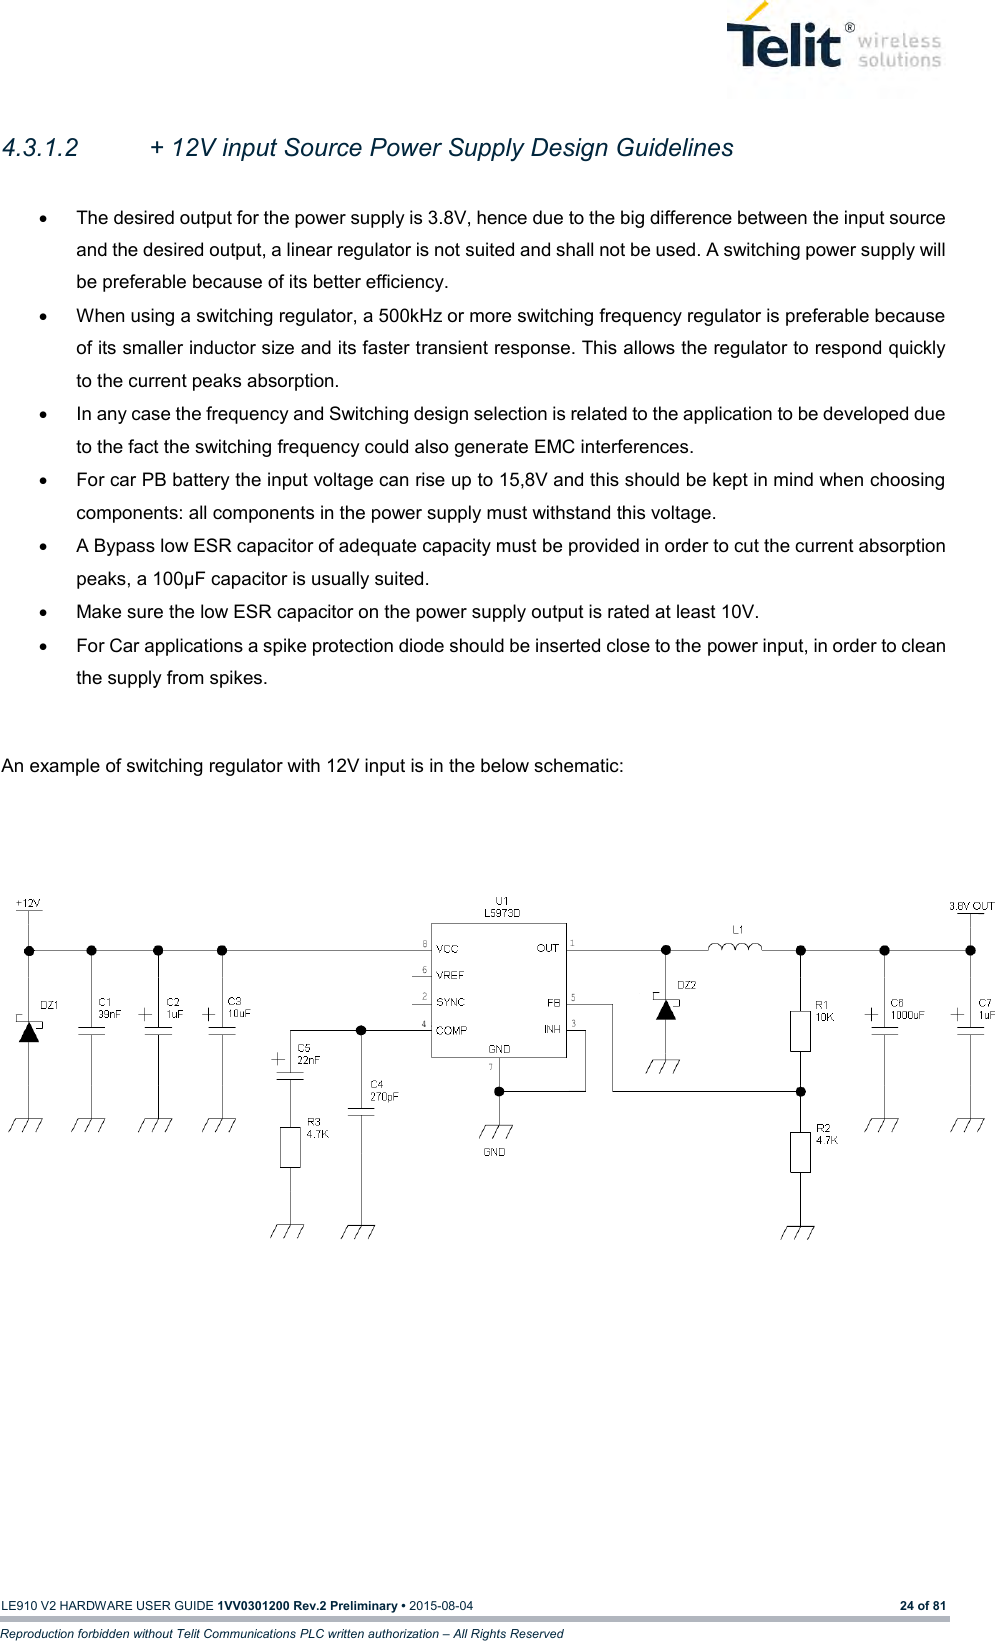   LE910 V2 HARDWARE USER GUIDE 1VV0301200 Rev.2 Preliminary • 2015-08-04 24 of 81 Reproduction forbidden without Telit Communications PLC written authorization – All Rights Reserved  4.3.1.2  + 12V input Source Power Supply Design Guidelines    The desired output for the power supply is 3.8V, hence due to the big difference between the input source and the desired output, a linear regulator is not suited and shall not be used. A switching power supply will be preferable because of its better efficiency.   When using a switching regulator, a 500kHz or more switching frequency regulator is preferable because of its smaller inductor size and its faster transient response. This allows the regulator to respond quickly to the current peaks absorption.    In any case the frequency and Switching design selection is related to the application to be developed due to the fact the switching frequency could also generate EMC interferences.   For car PB battery the input voltage can rise up to 15,8V and this should be kept in mind when choosing components: all components in the power supply must withstand this voltage.   A Bypass low ESR capacitor of adequate capacity must be provided in order to cut the current absorption peaks, a 100μF capacitor is usually suited.   Make sure the low ESR capacitor on the power supply output is rated at least 10V.   For Car applications a spike protection diode should be inserted close to the power input, in order to clean the supply from spikes.   An example of switching regulator with 12V input is in the below schematic:        